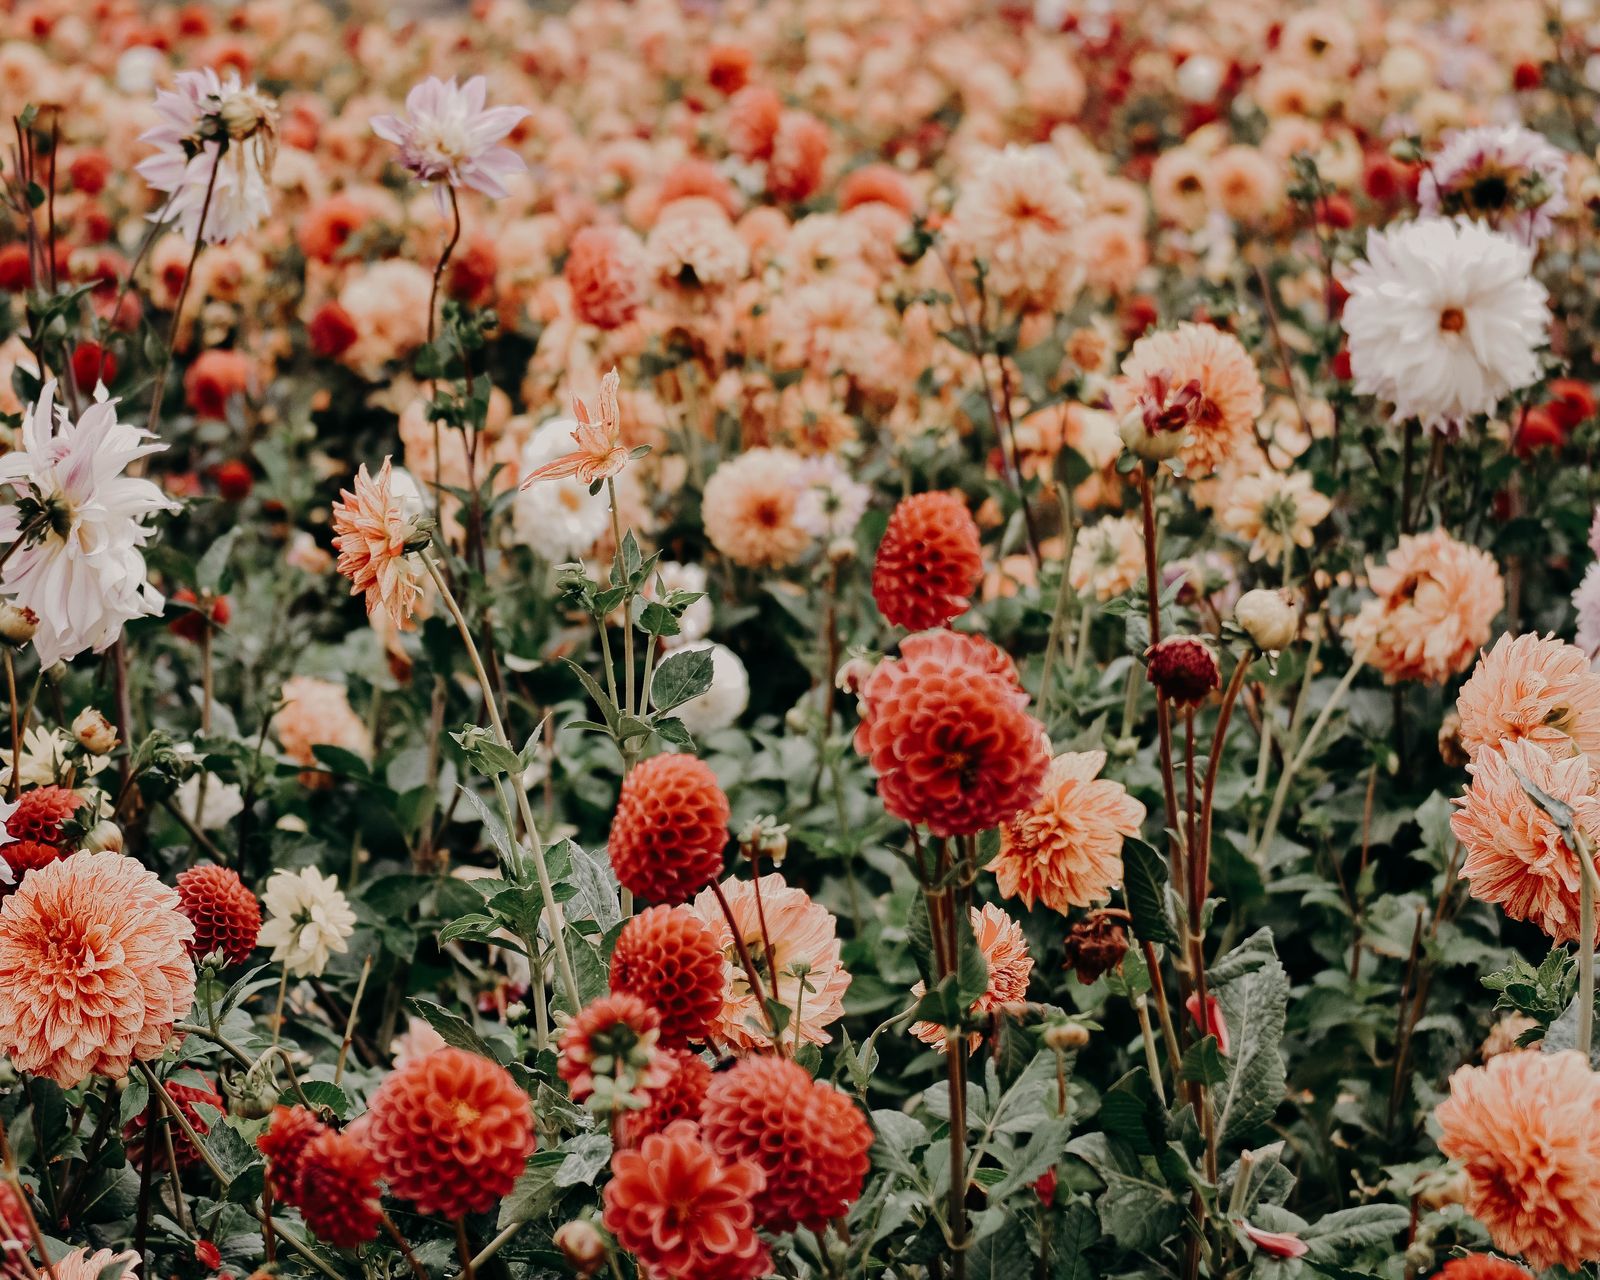 A lush field of vibrant dahlias in varying shades of red, orange, and white, with full blooms and buds in soft focus.